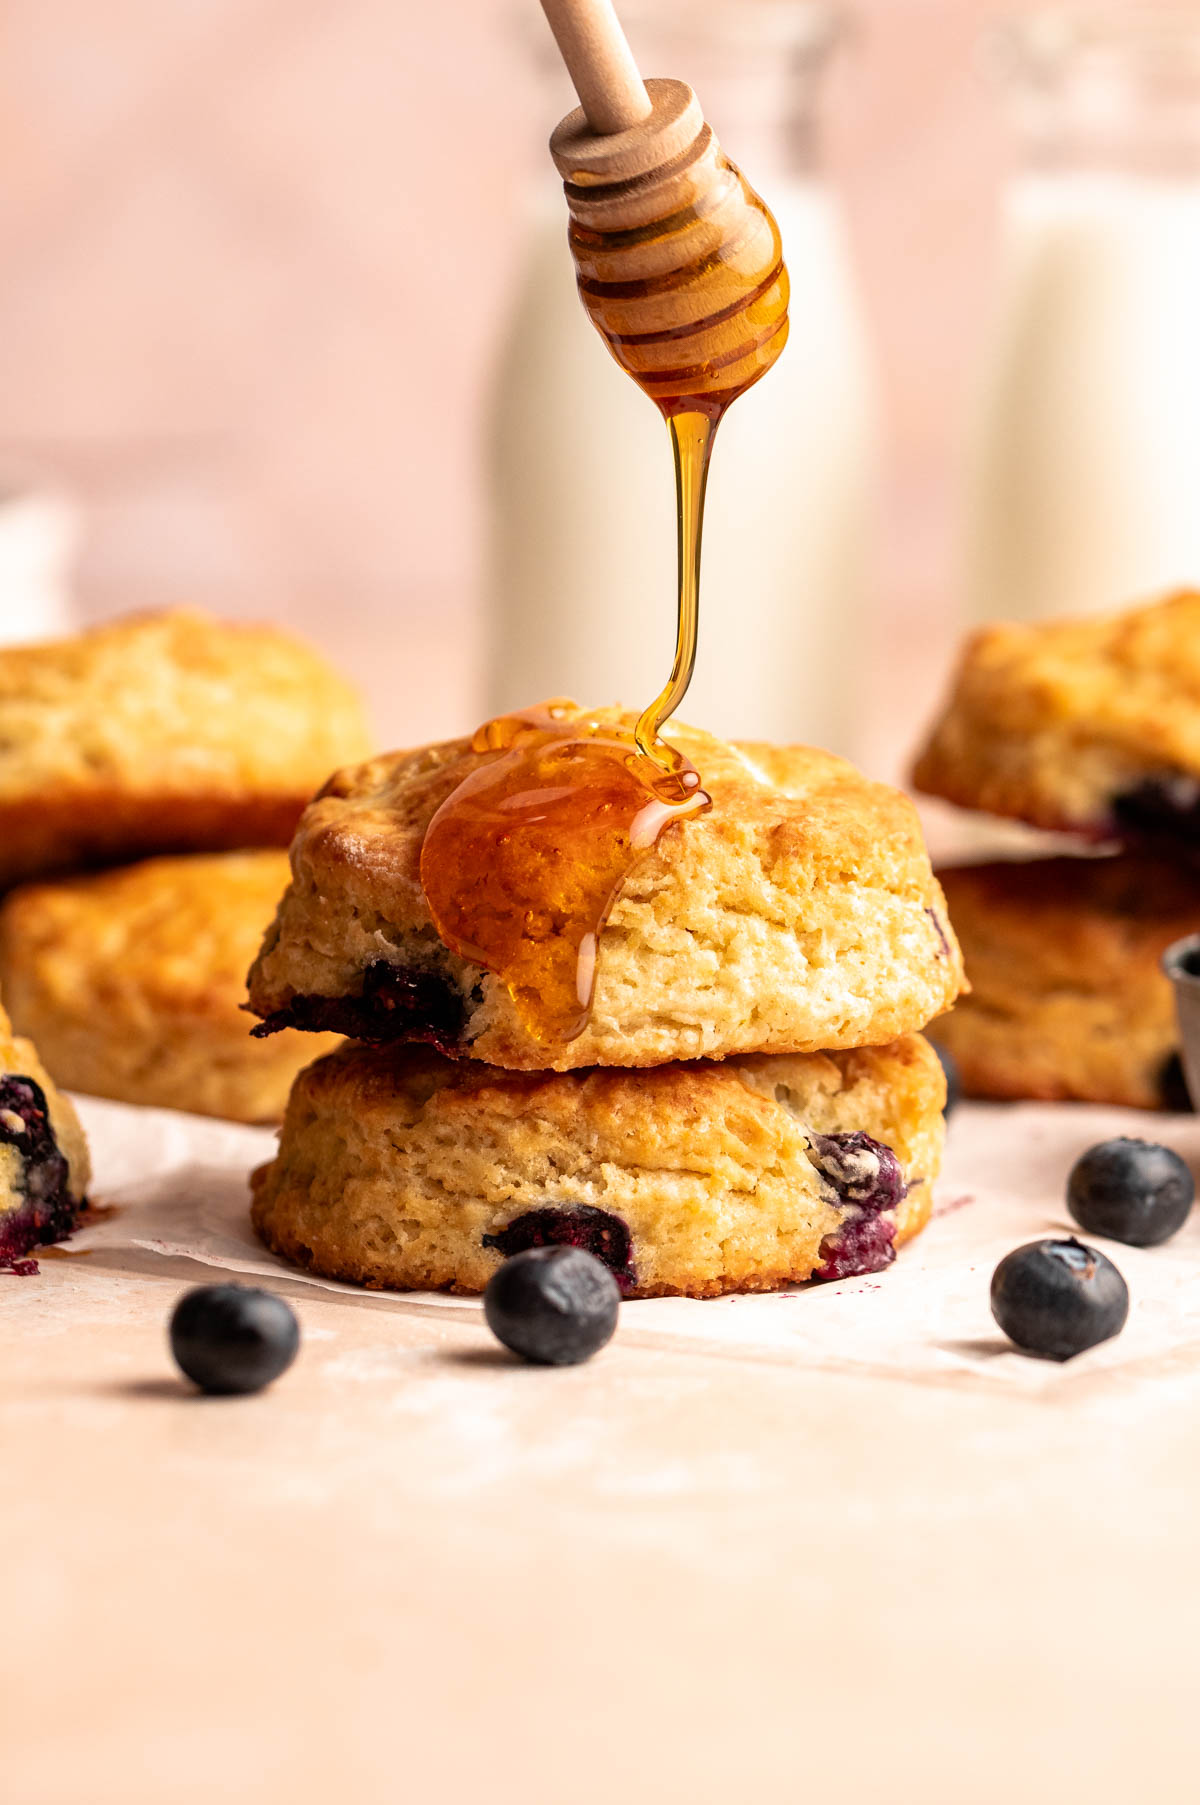 Honey drizzled on a blueberry biscuit.